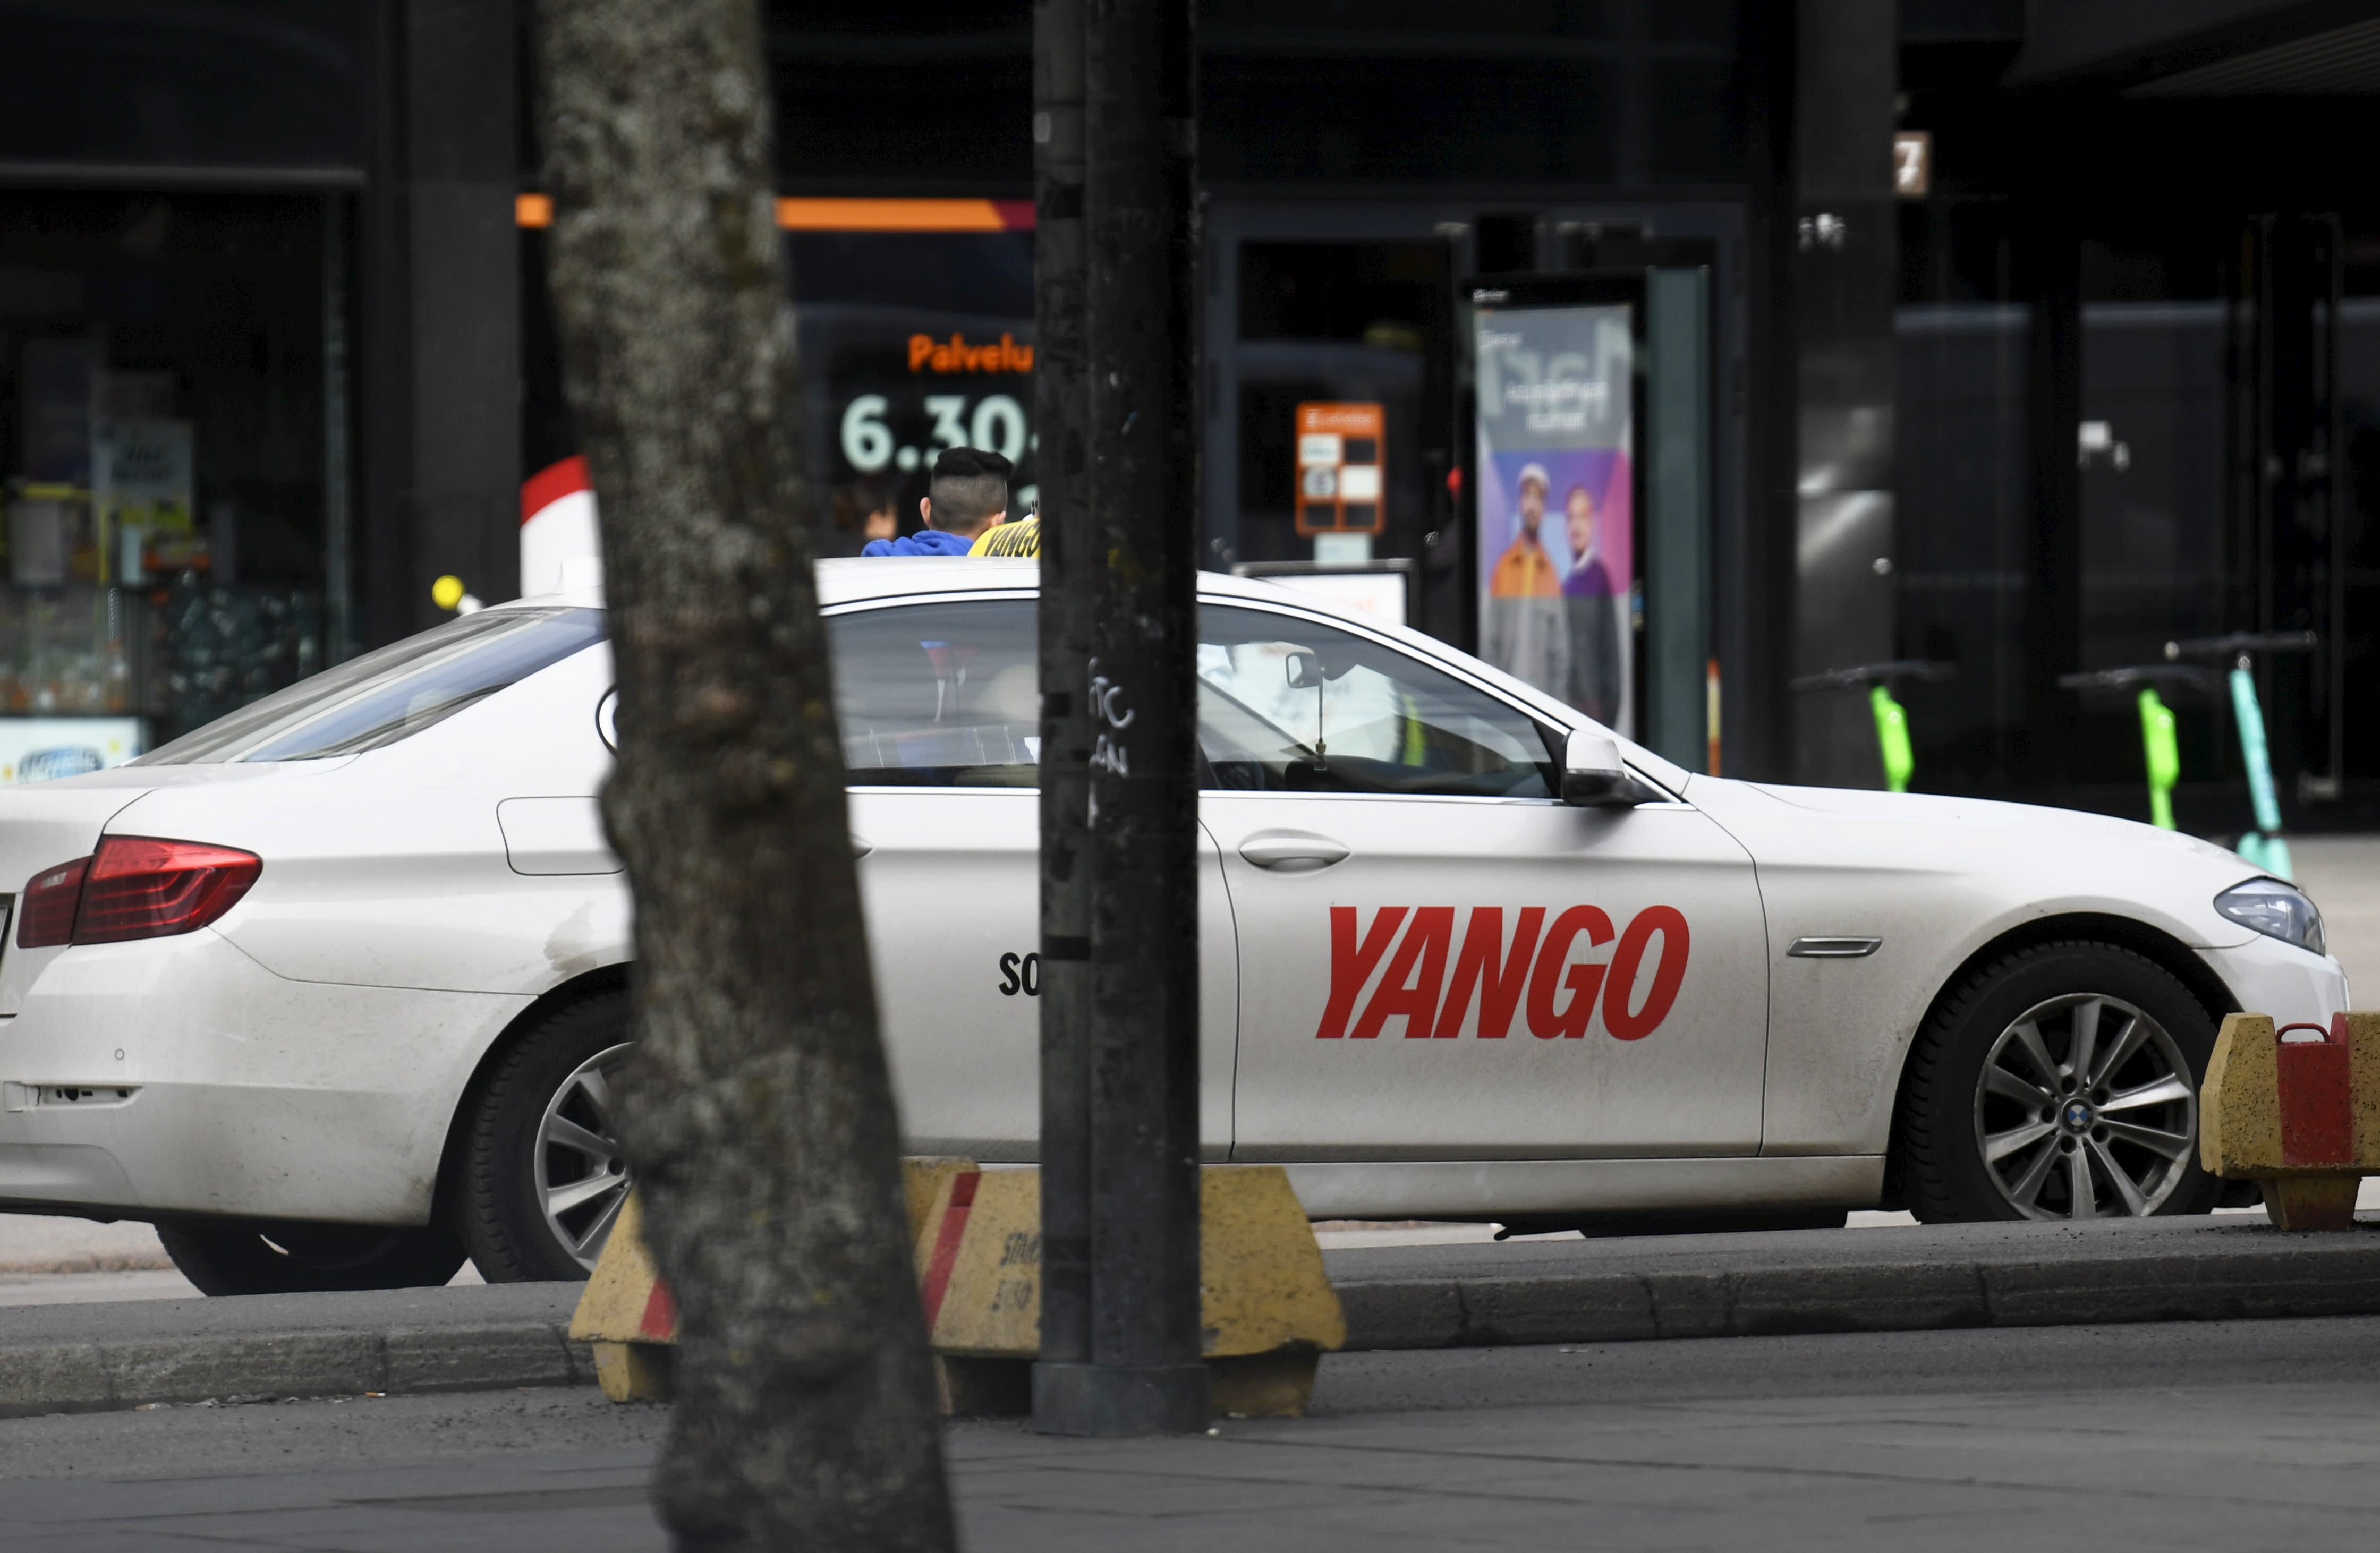 Finland is not planning any restrictions on the Russian taxi company Yango